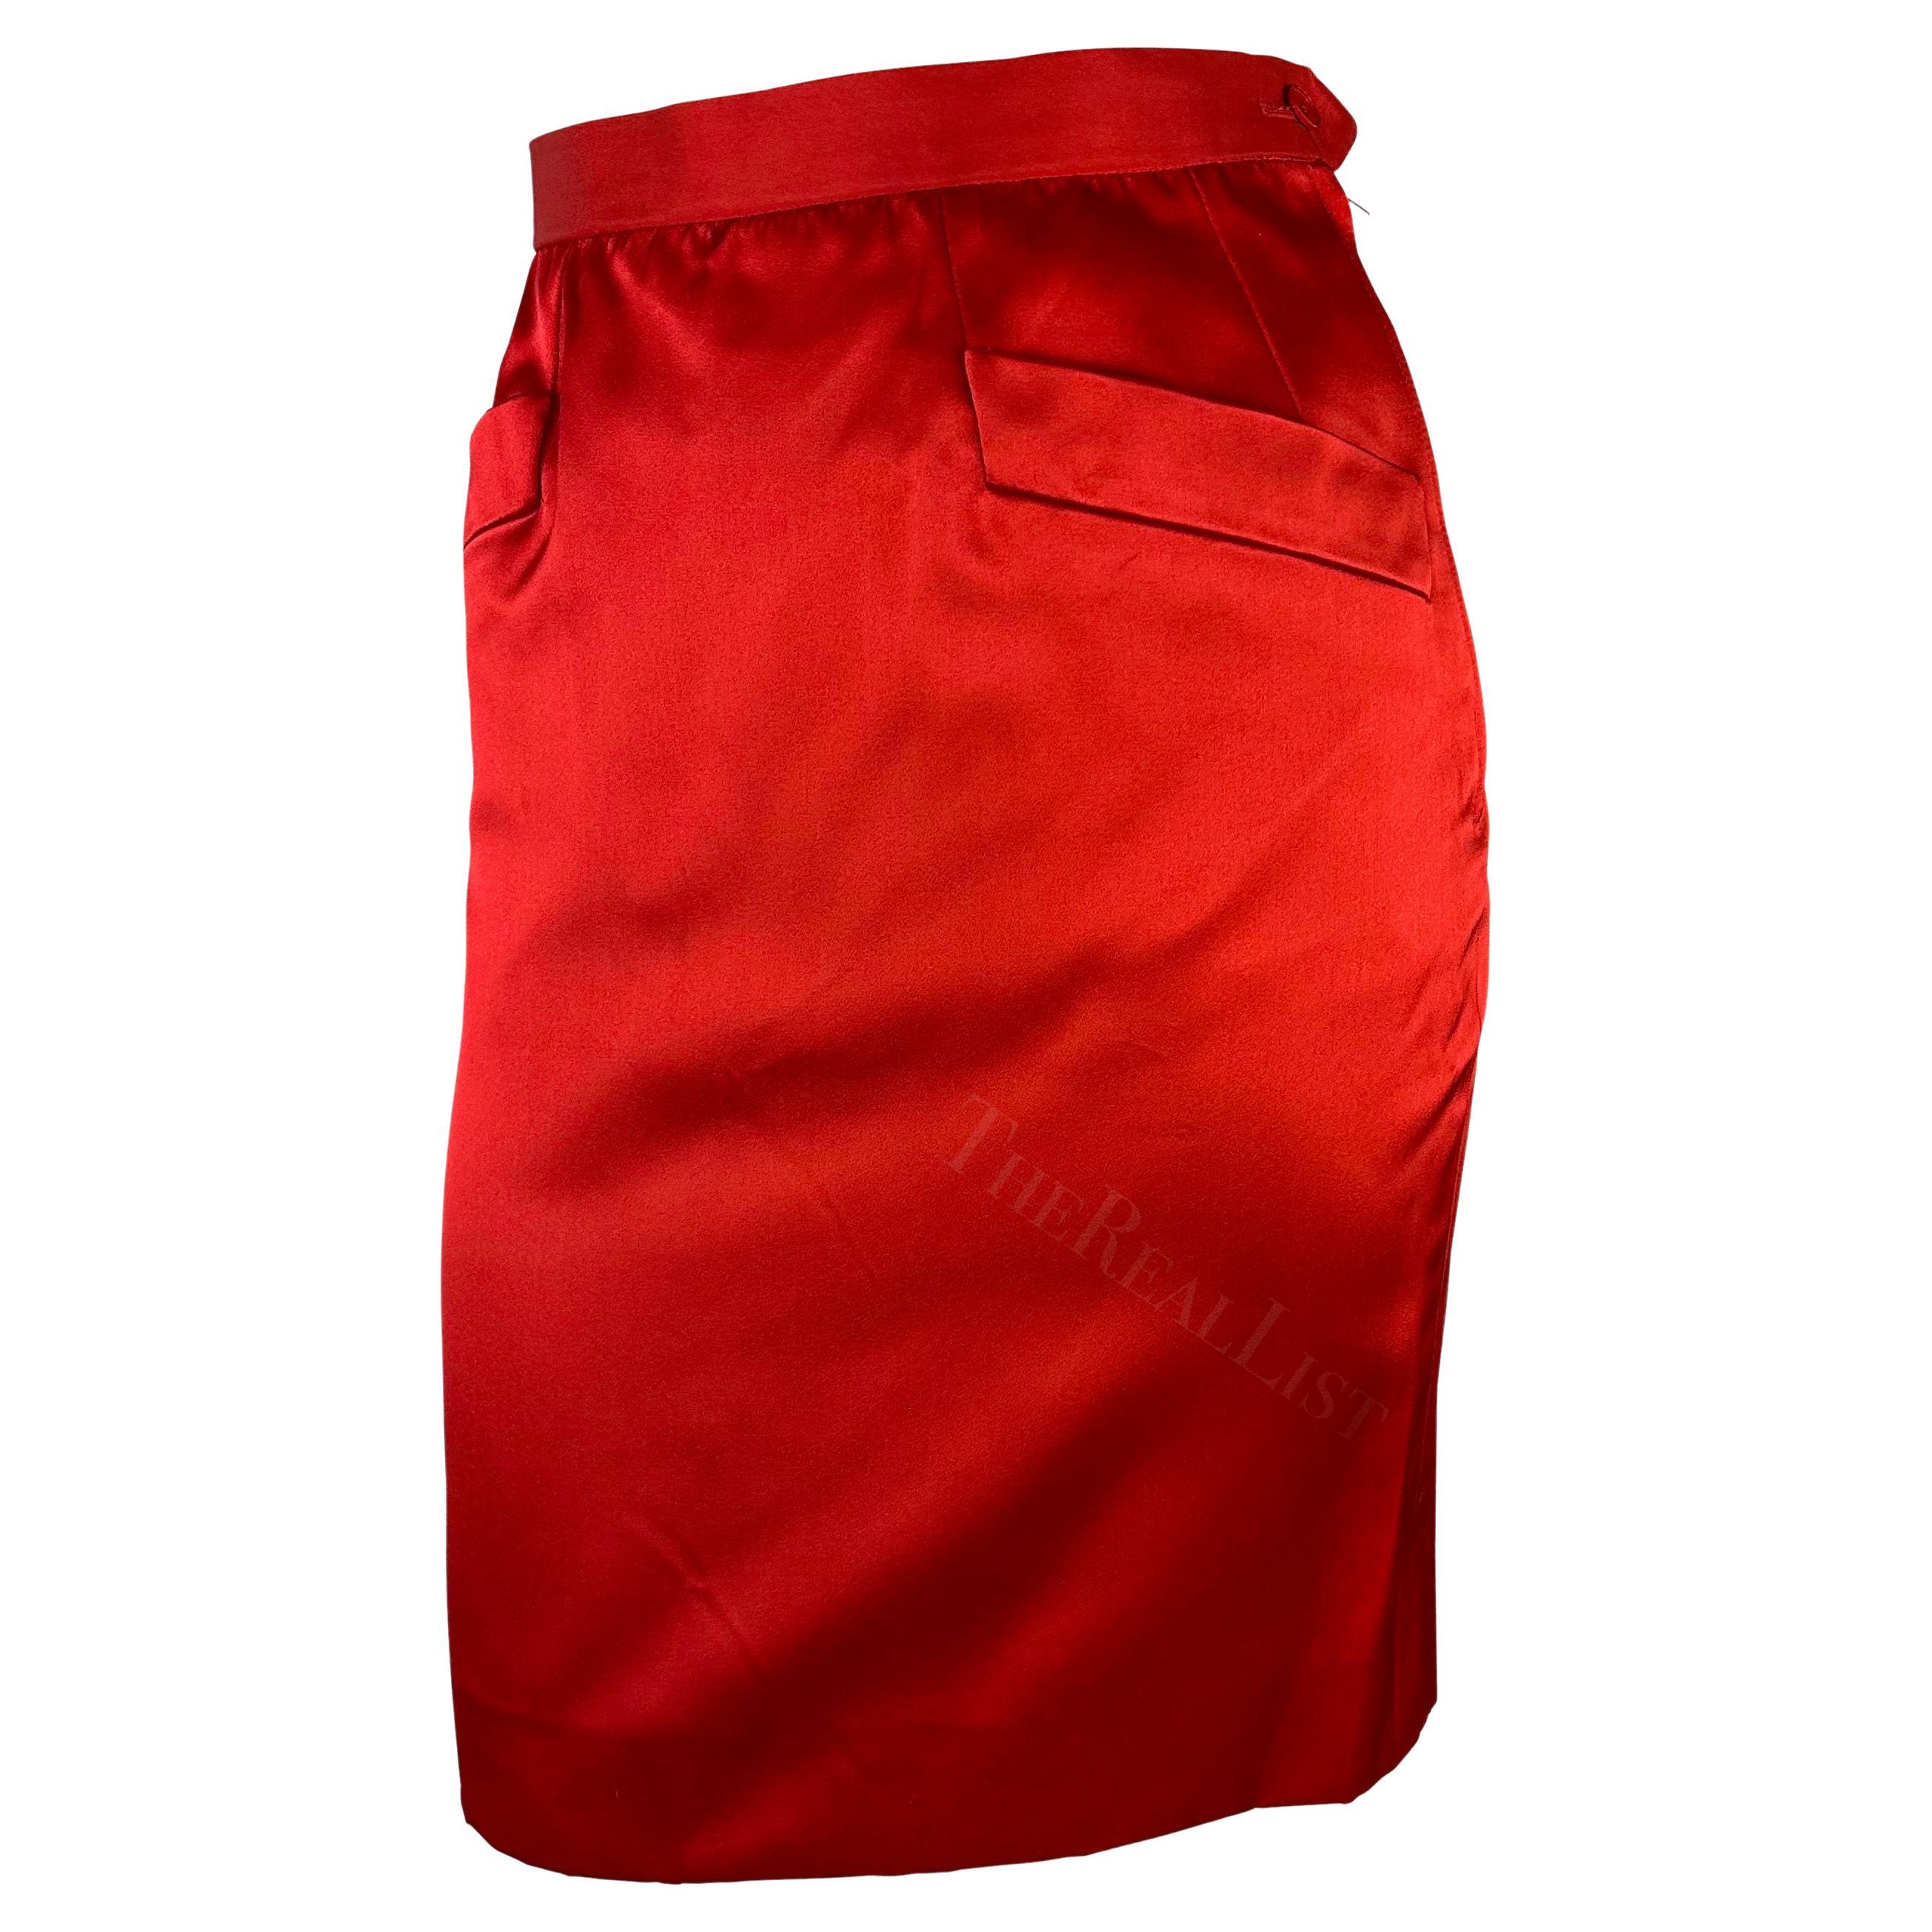 F/W 1988 Saint Laurent Rive Gauche Runway Red Satin Pocket Pencil Skirt In Good Condition For Sale In West Hollywood, CA